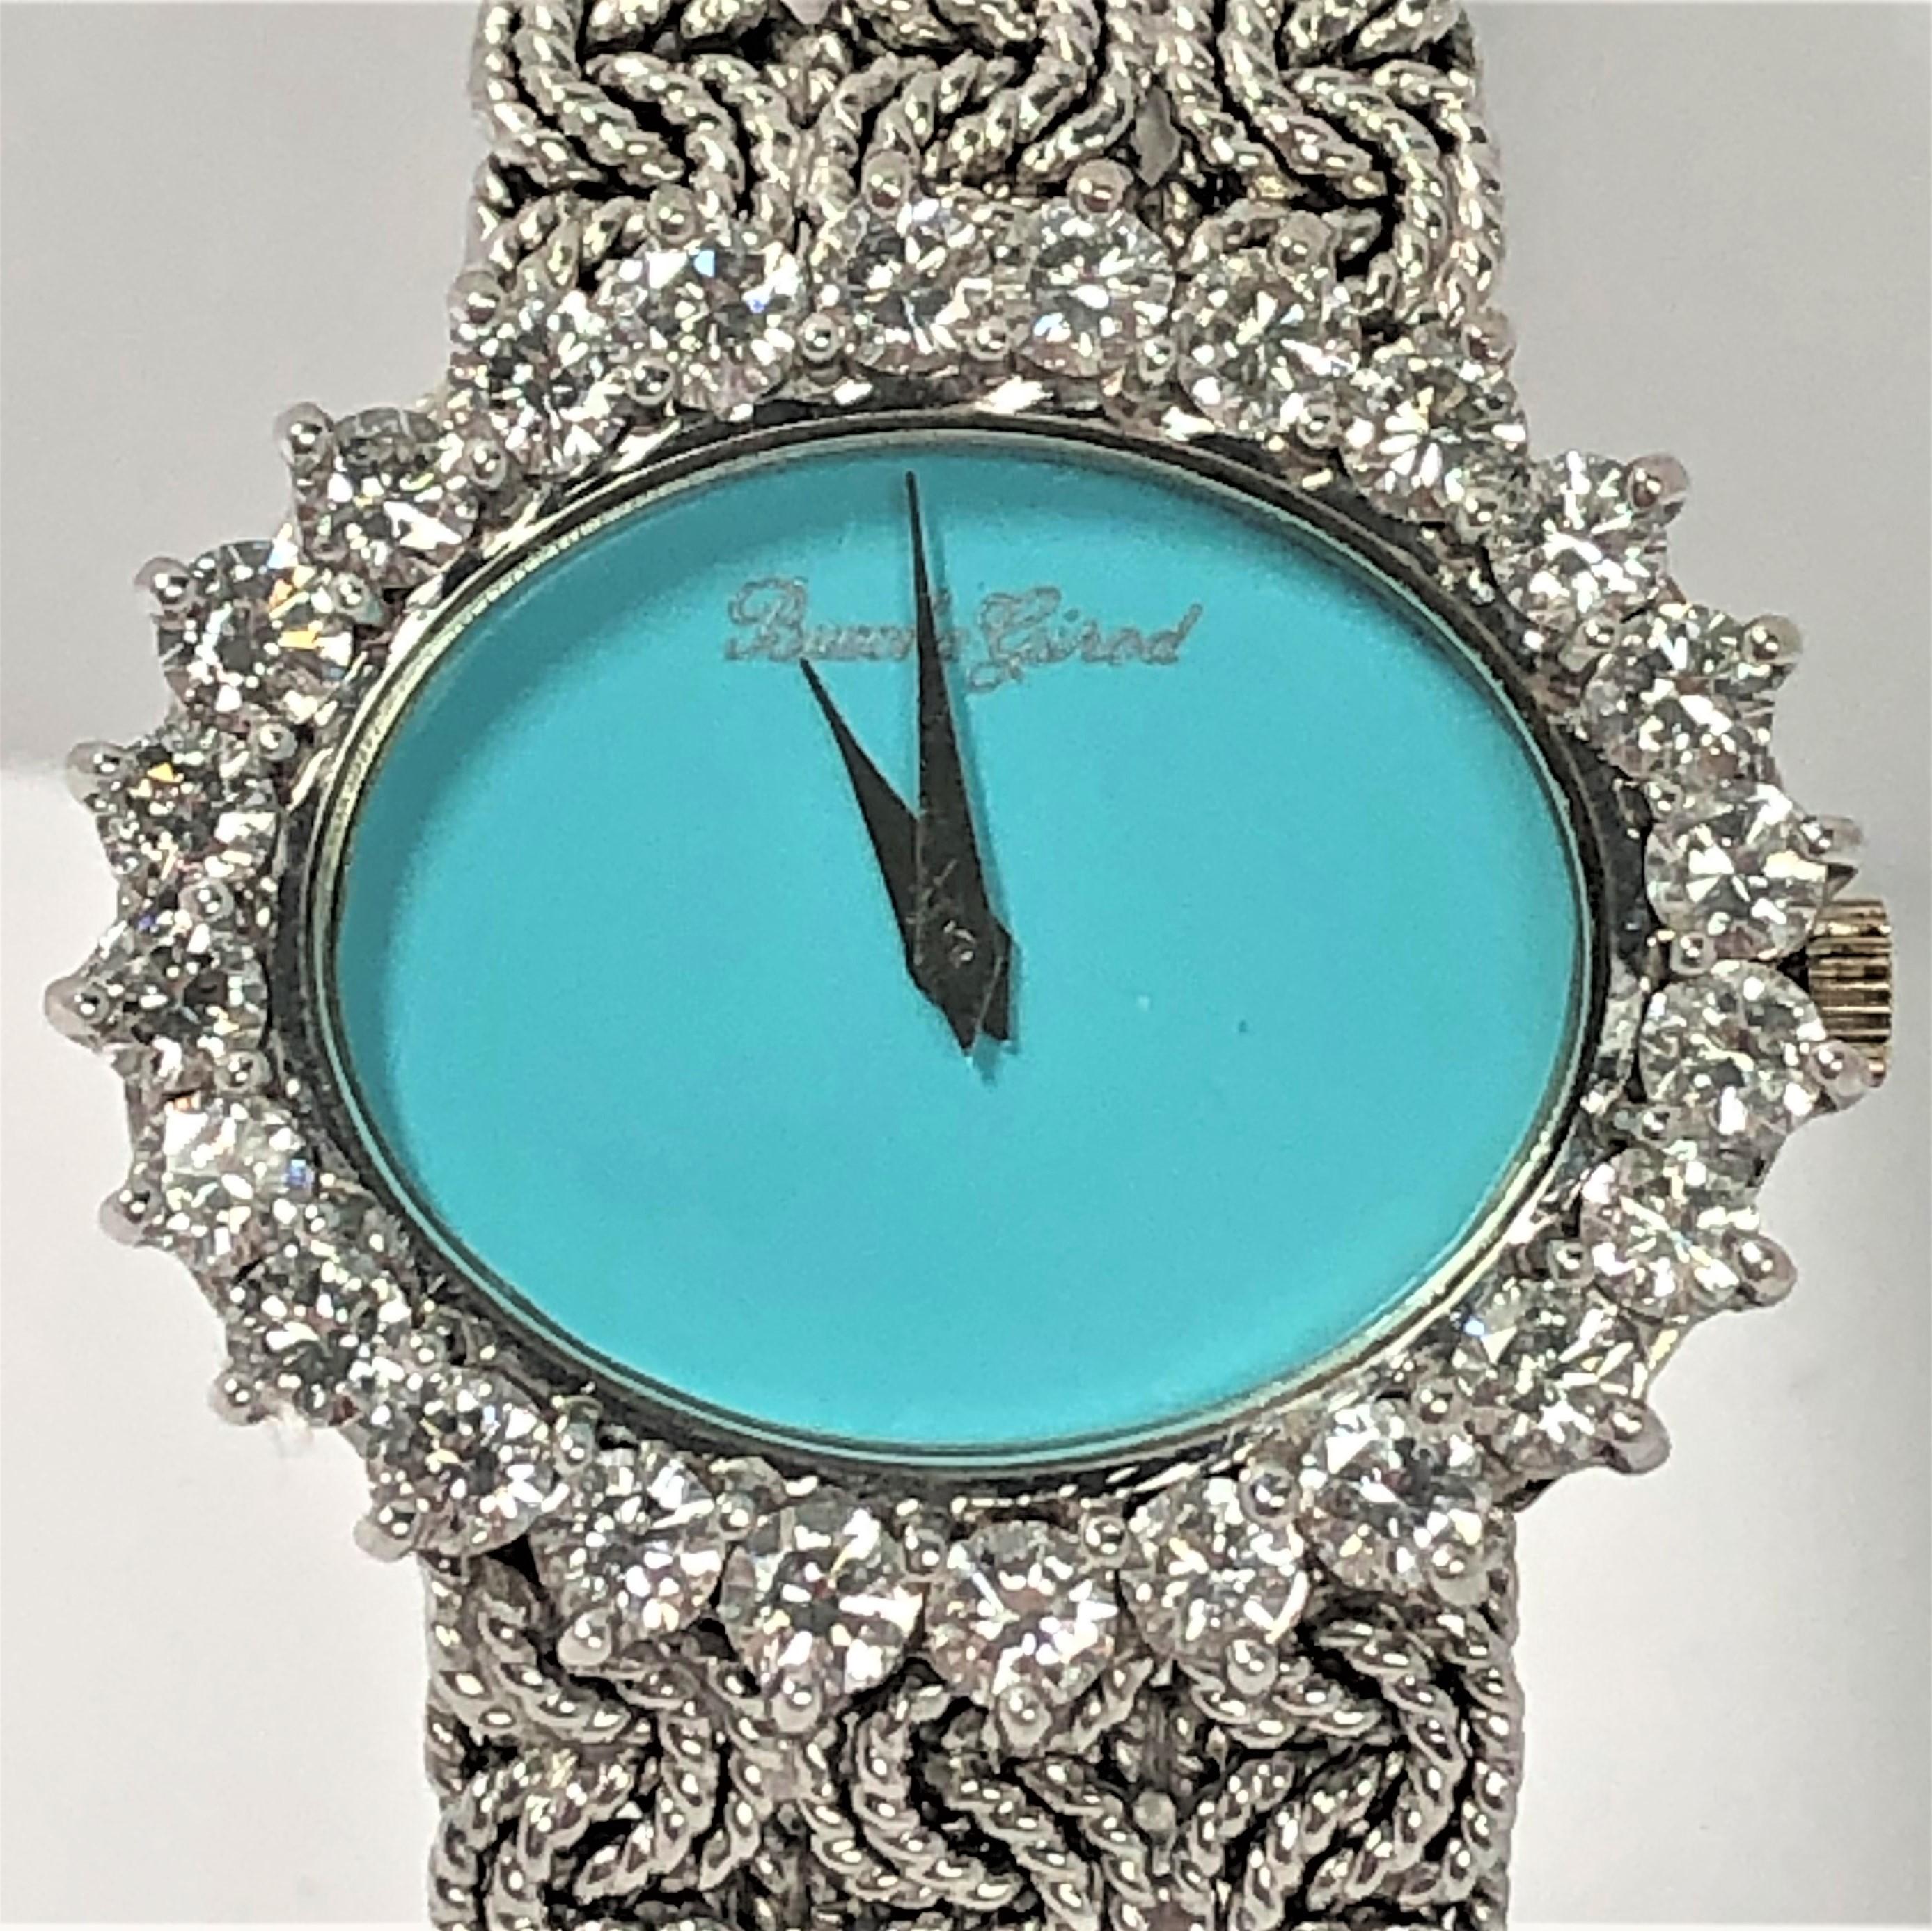 This outstanding 18K White Gold Ladies Bueche Girod Watch has a
horizontal turquoise oval dial surrounded by 24 round brilliant cut
diamonds weighing an approximate total of 2.35CT of overall G Color
and VS1 Clarity. The oval diamond bezel measures